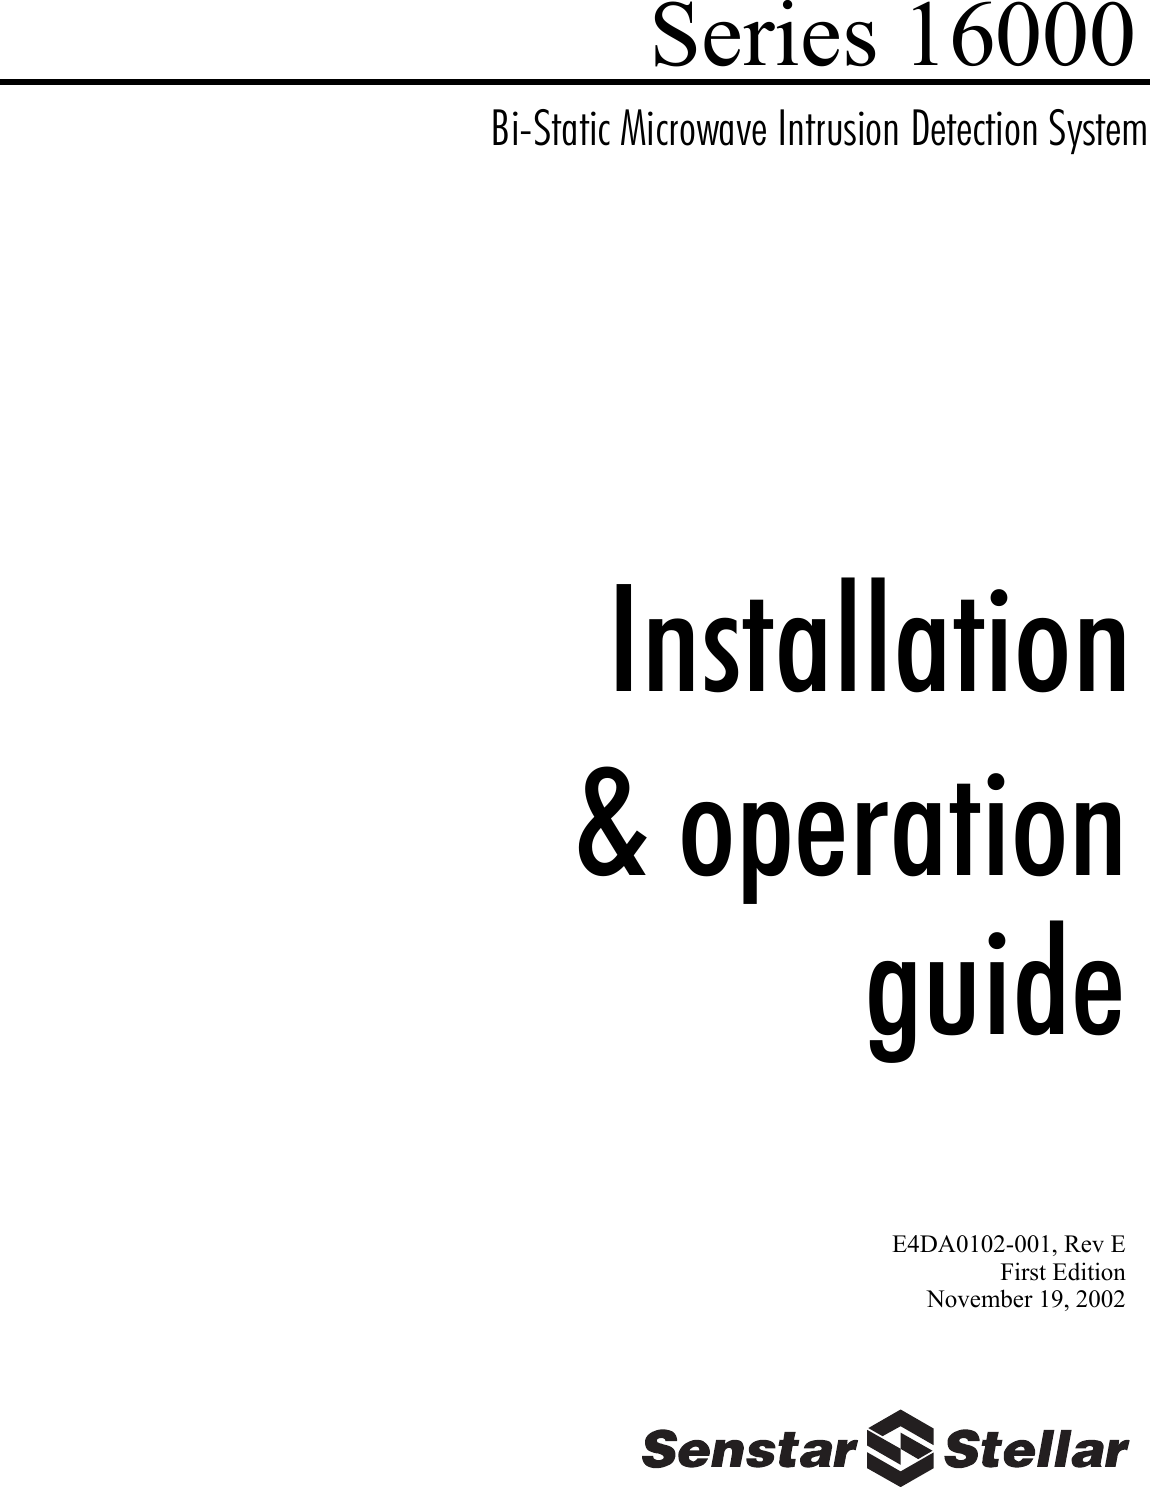 InstallationSeries 16000Bi-Static Microwave Intrusion Detection System&amp; operationguideE4DA0102-001, Rev EFirst EditionNovember 19, 2002